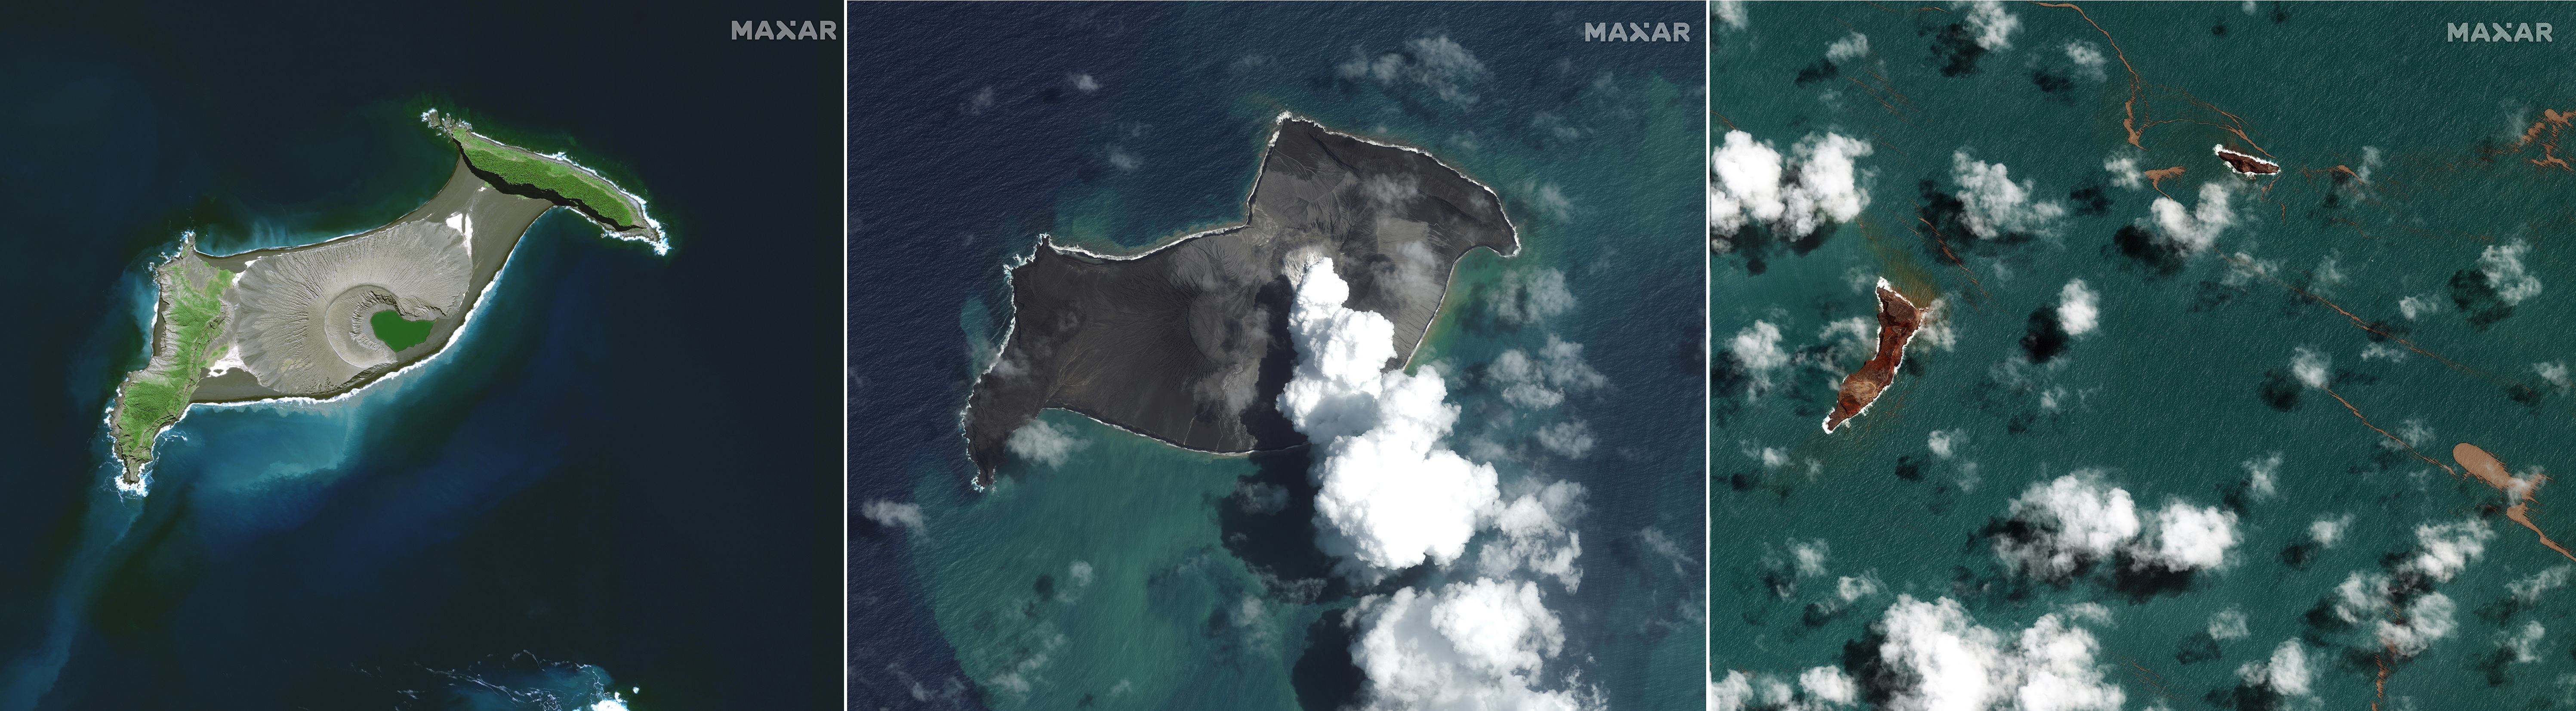 combination of satellite images released by Maxar Technologies